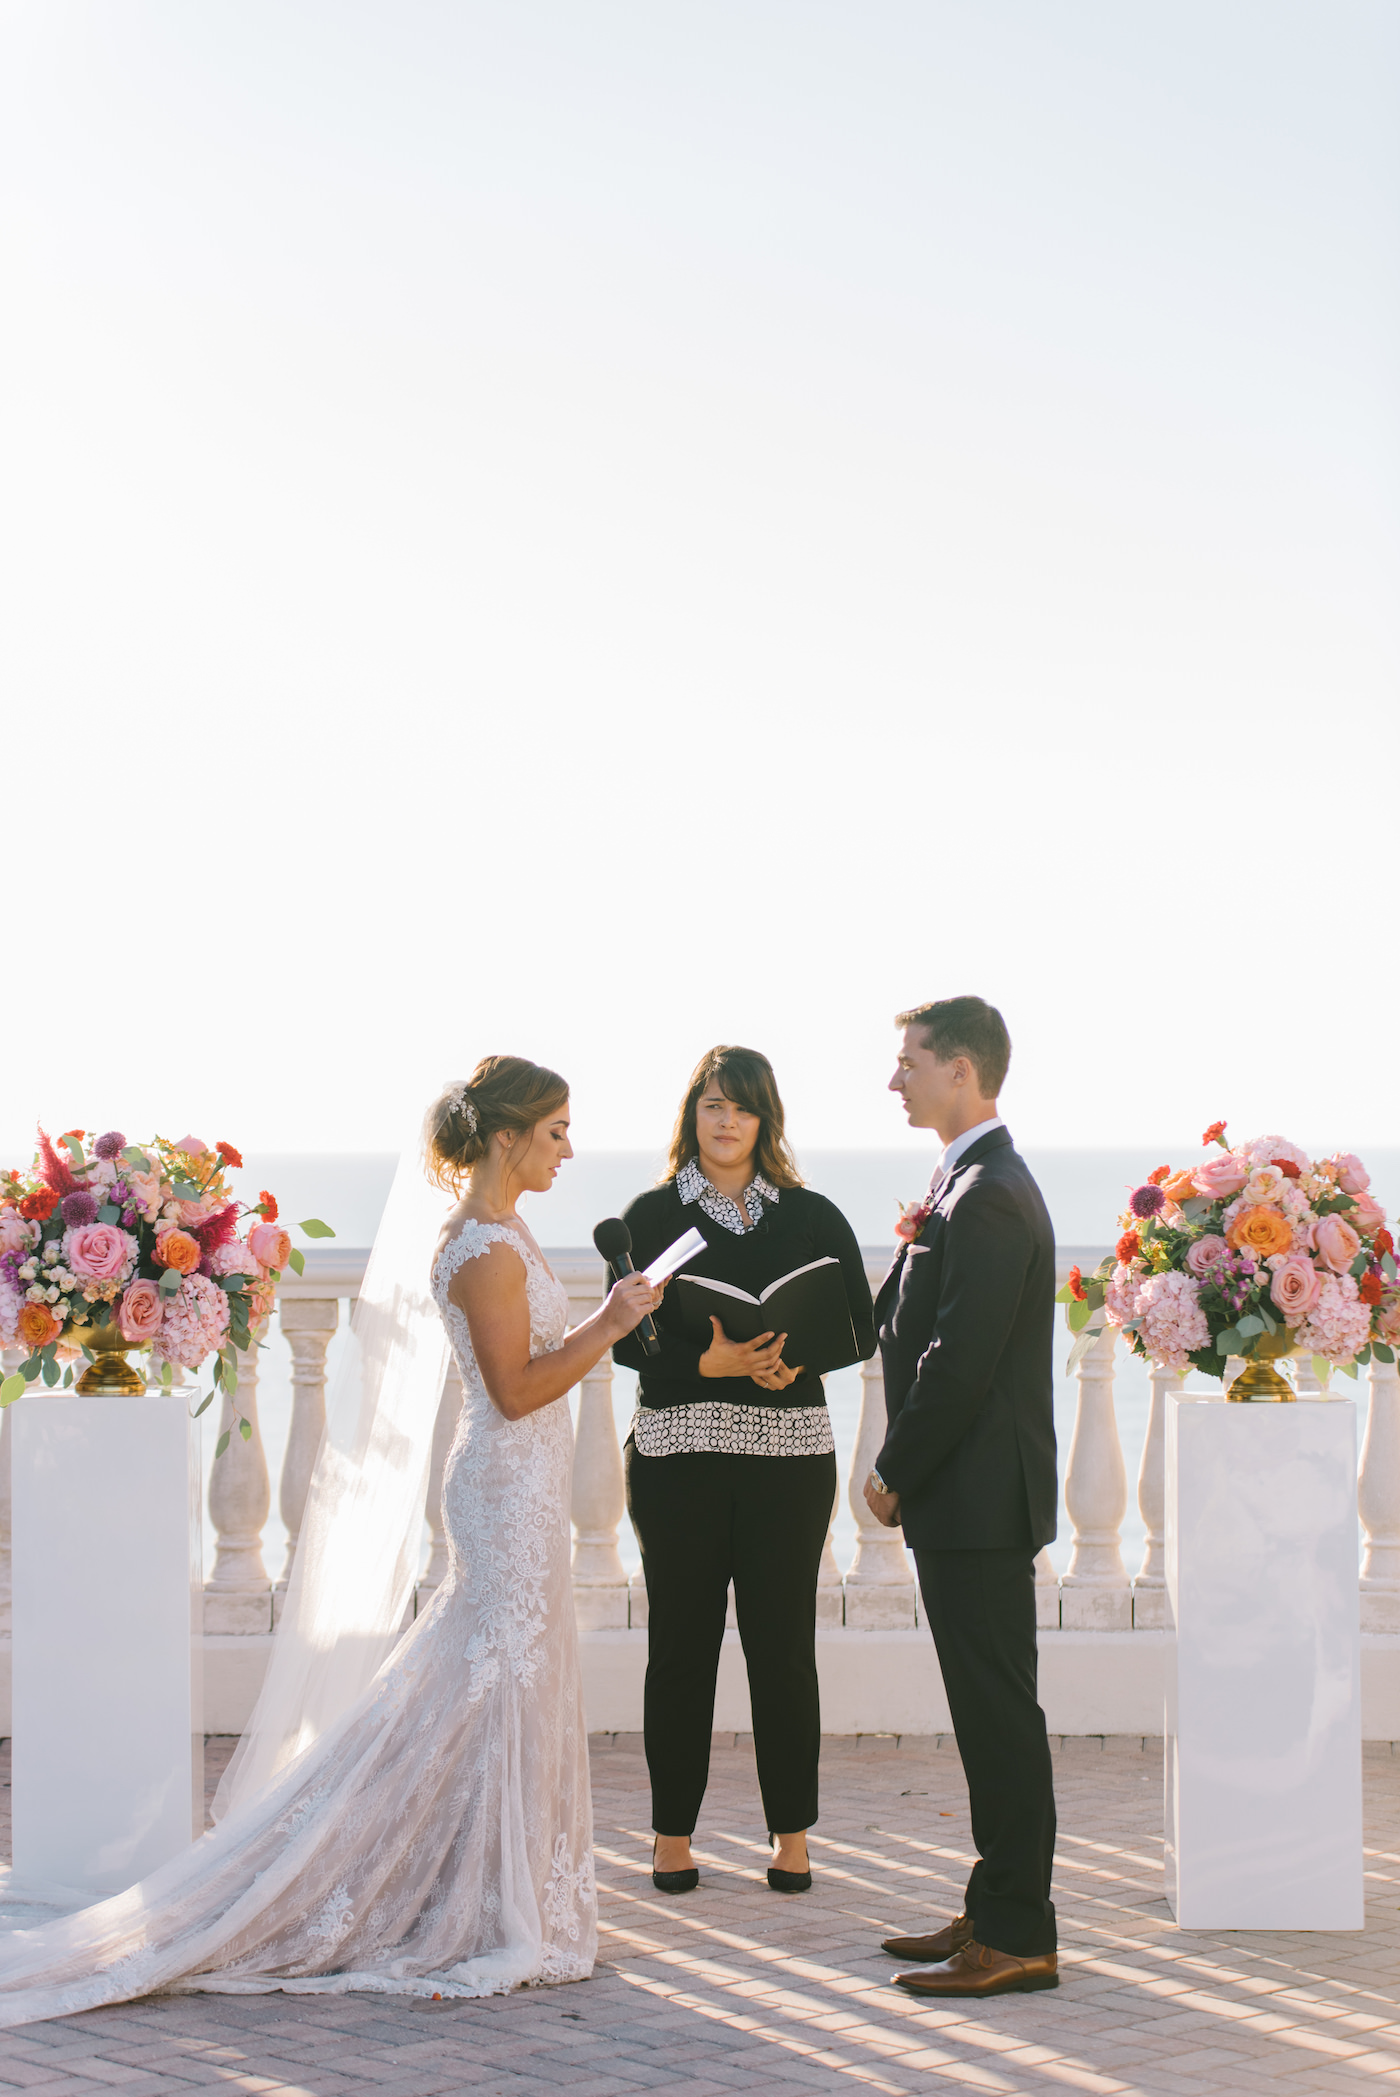 Bride and Groom Exchanging Vows during Outdoor Rooftop Ceremony at Clearwater Wedding Venue Hyatt Regency Clearwater Beach | Ceremony Backdrop White Pillars topped with Colorful Vibrant Tropical Floral Arrangements | Tampa Bay Wedding Photographer Kera Photography